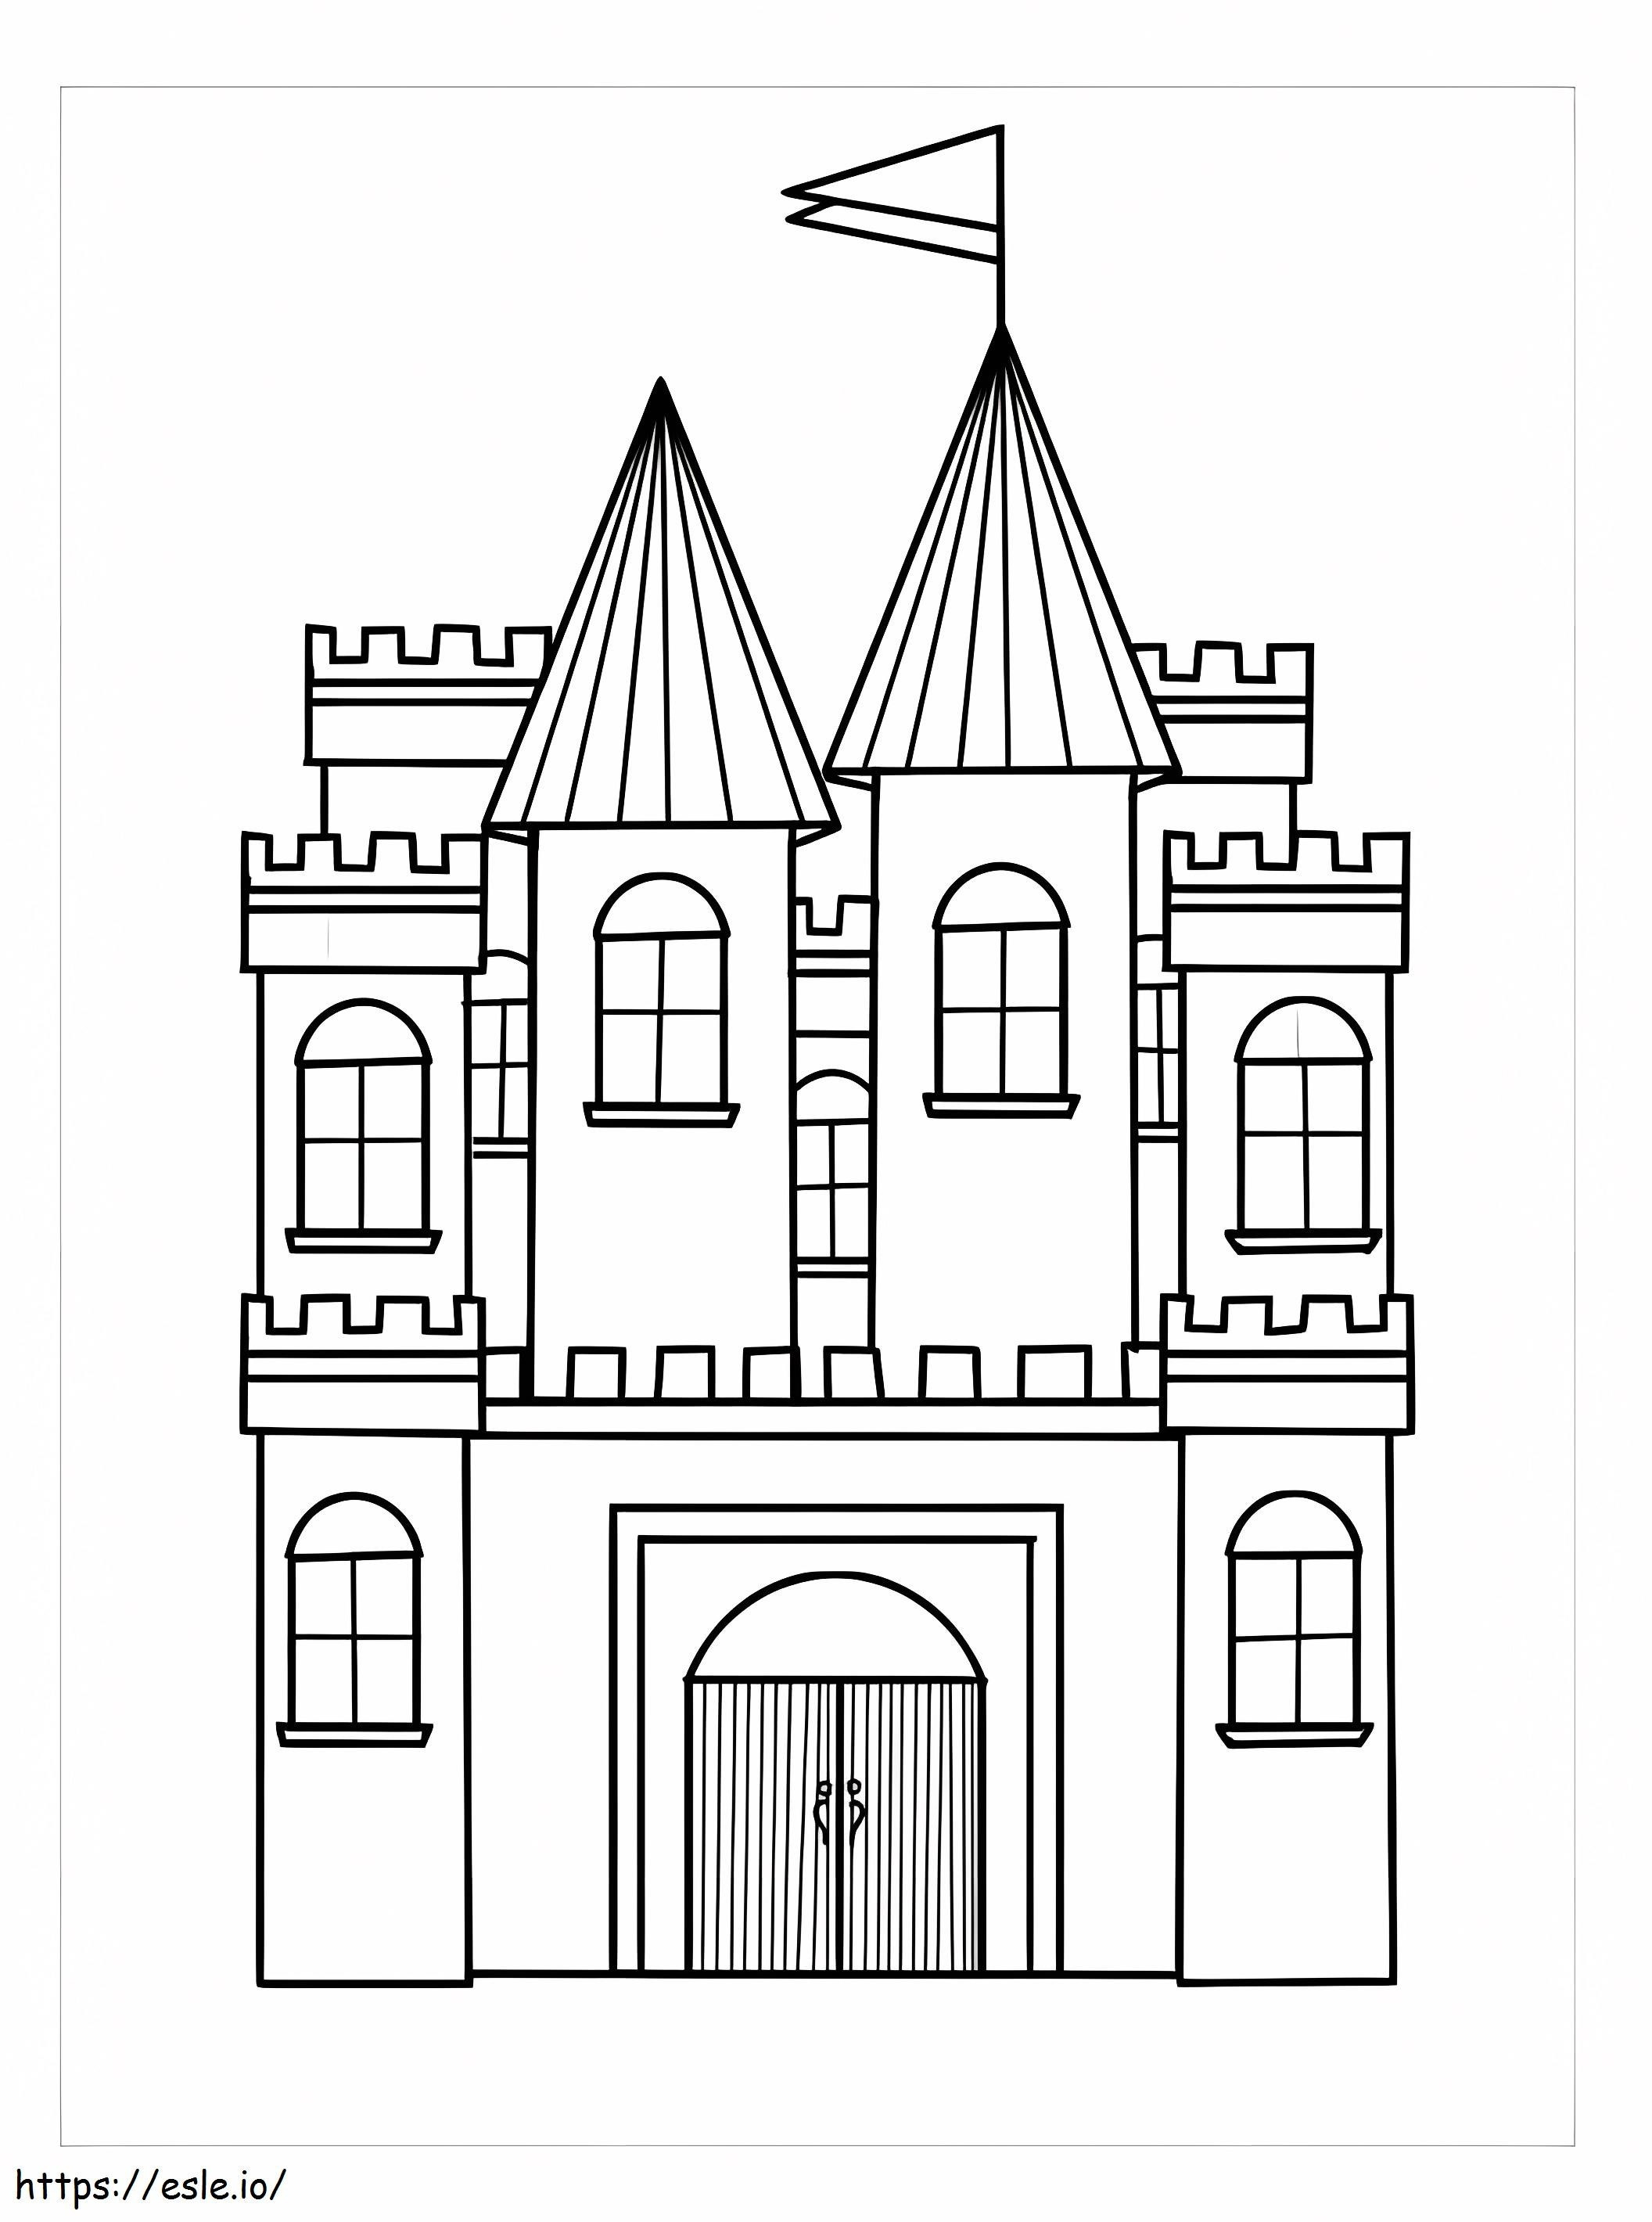 Printable Castle coloring page